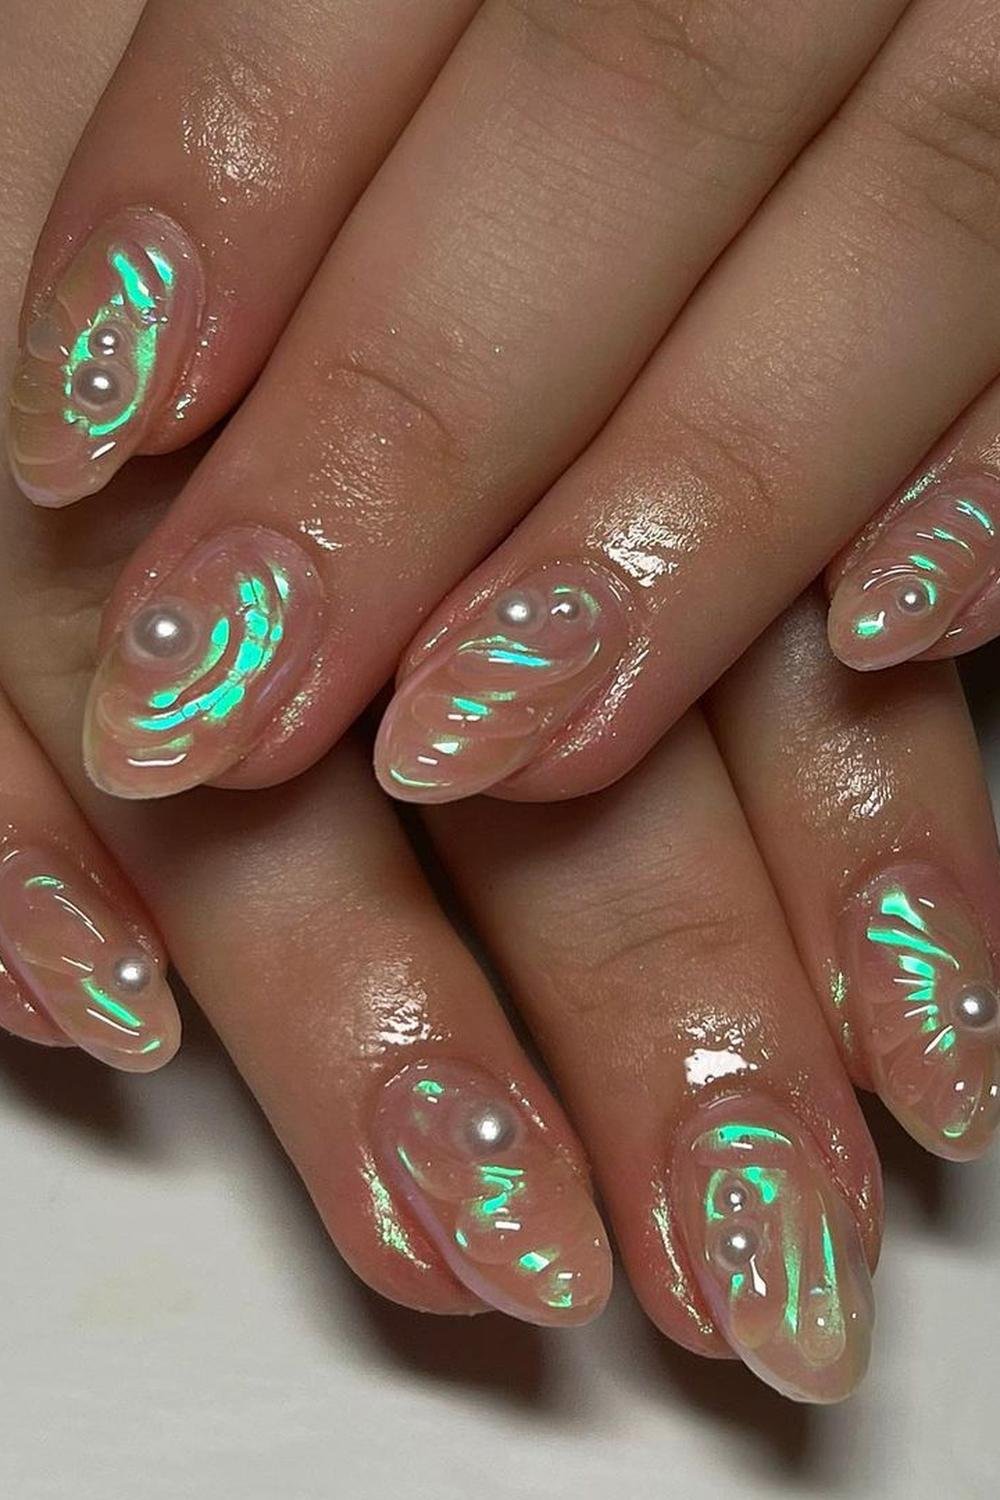 15 - Picture of Mermaid Nails